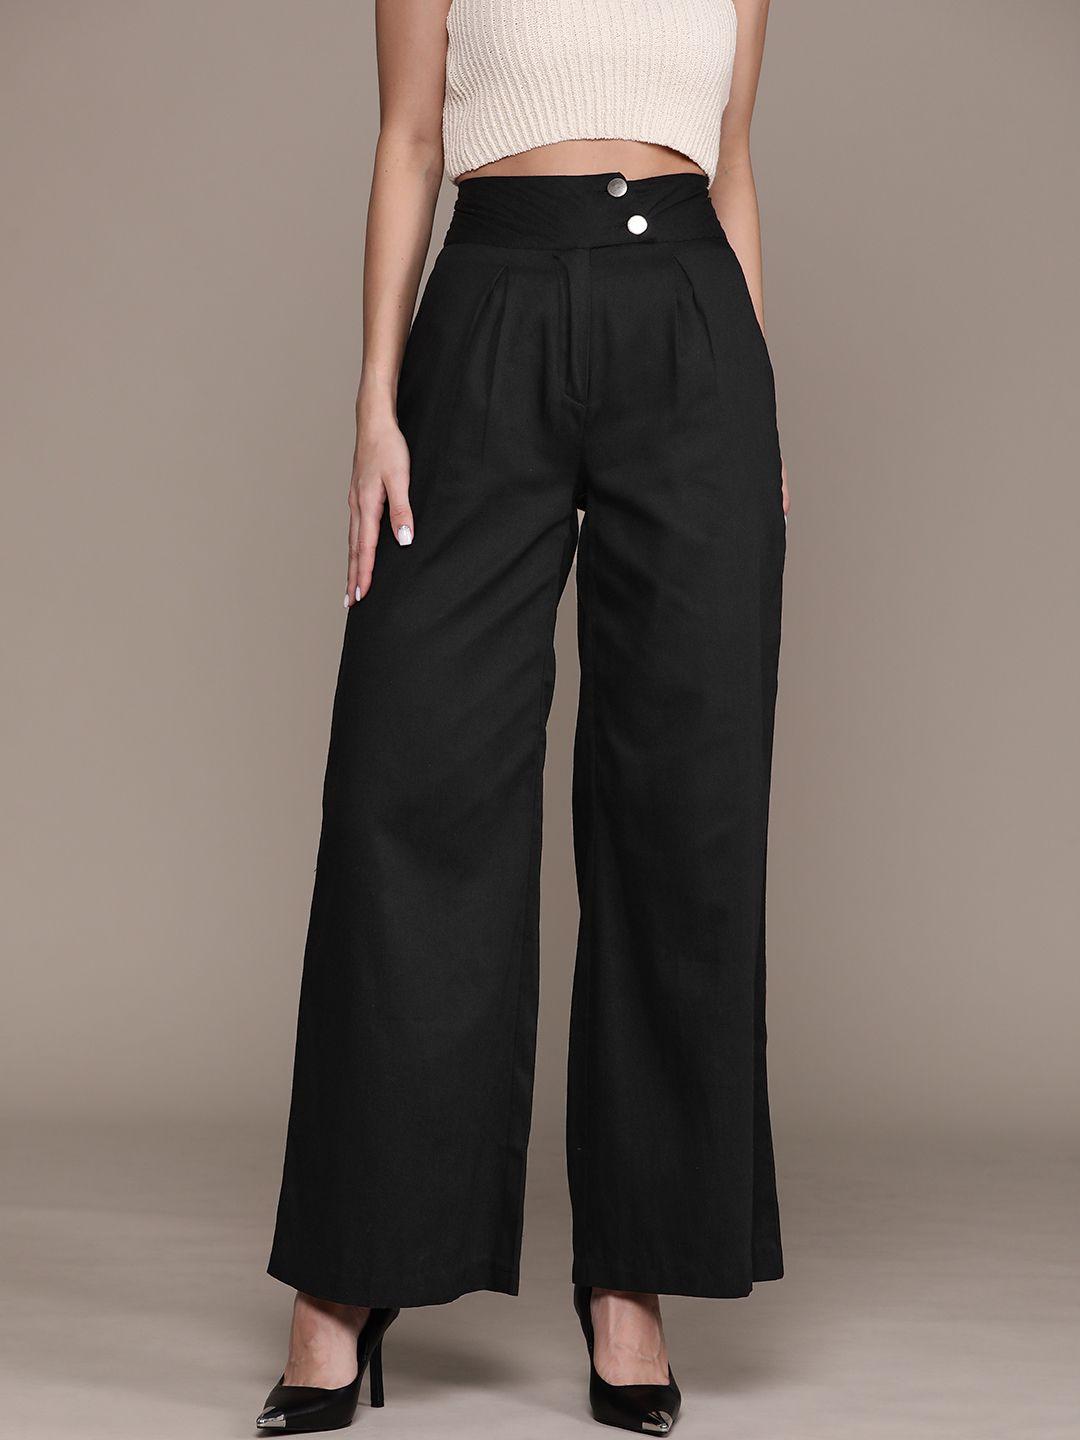 bebe all day high-rise parallel trouser